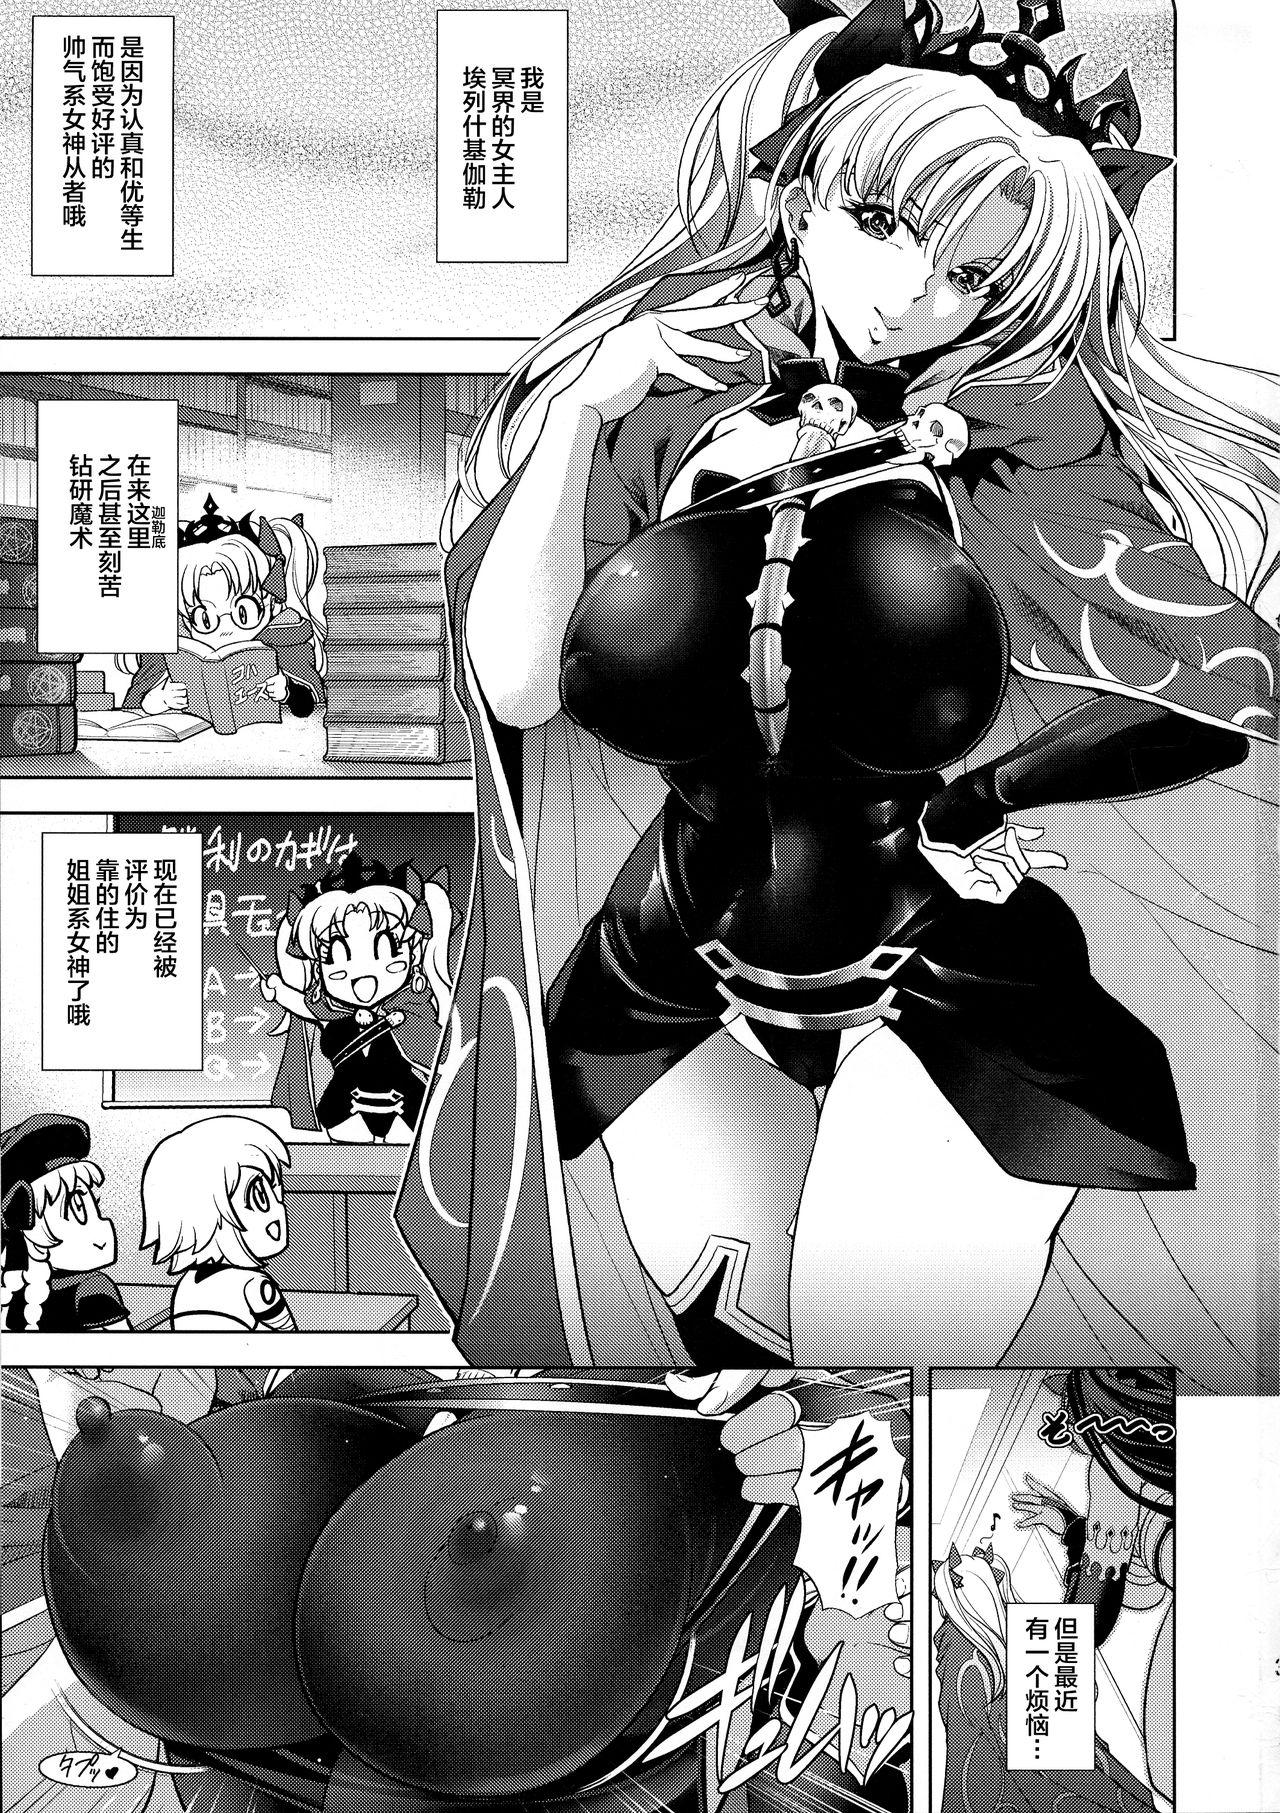 Shaking COMMAND CODE - Fate grand order Escort - Page 2